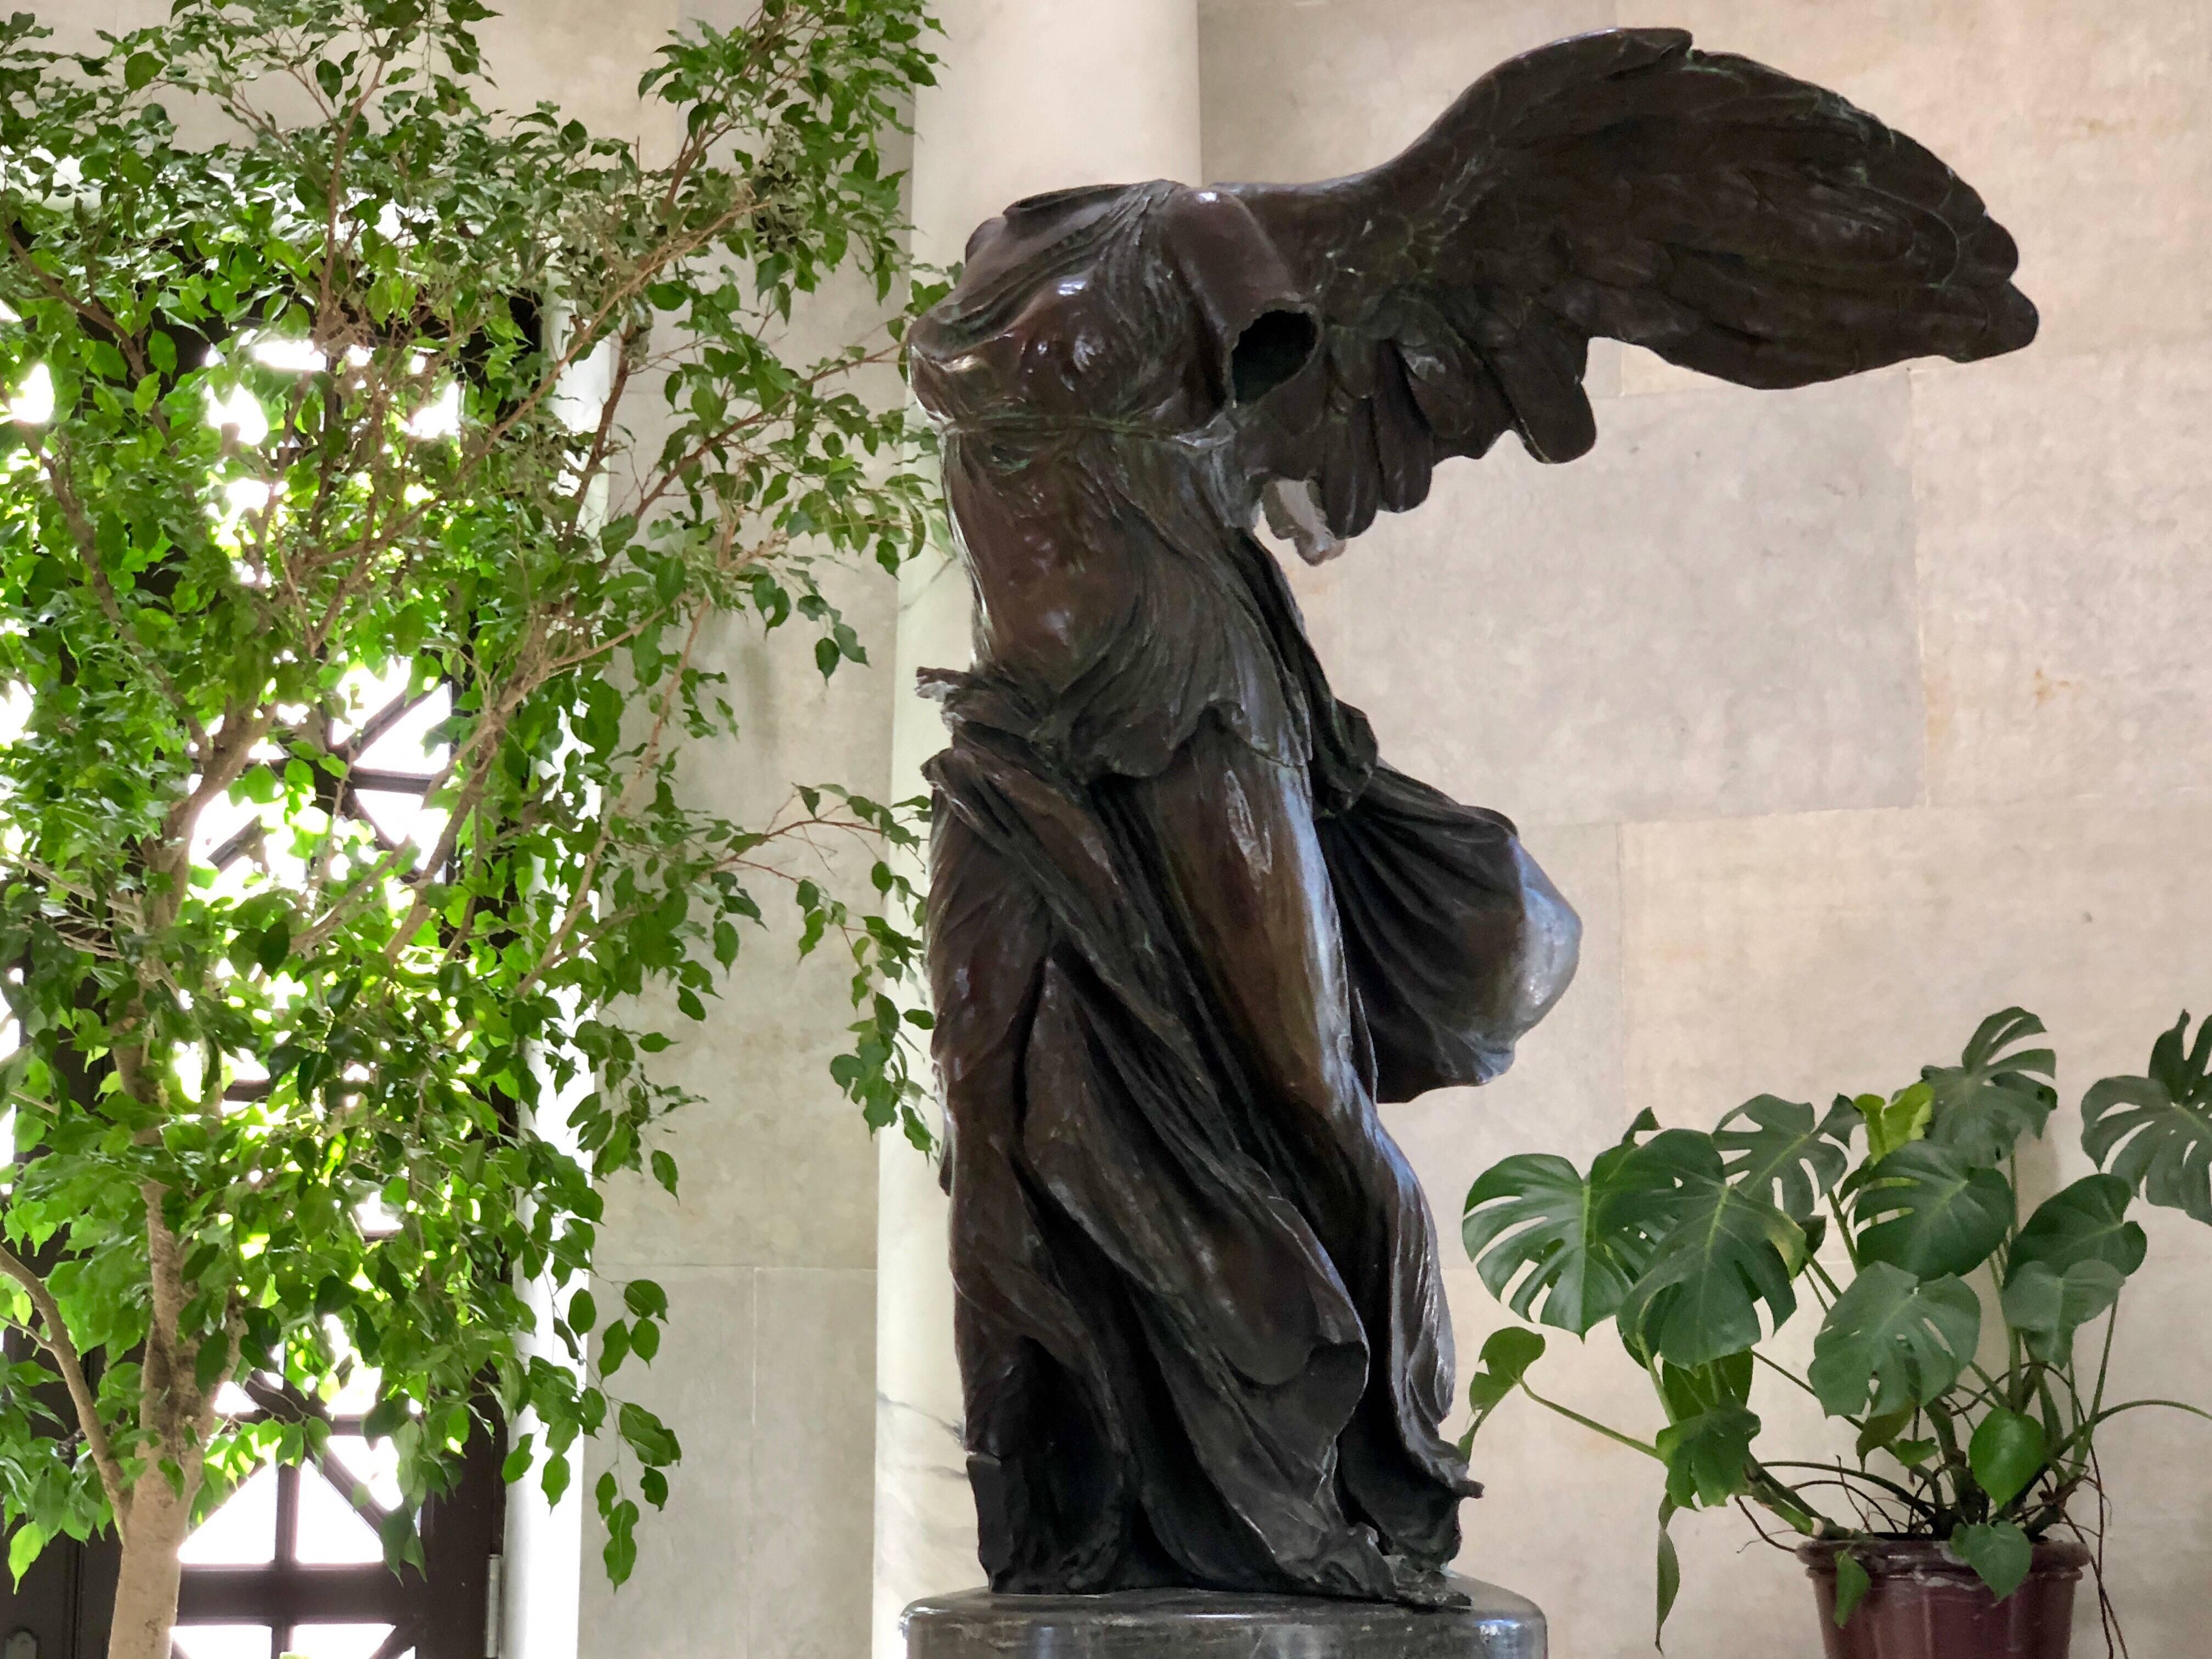 This is a stunning bronze example of the Winged Victory of Samothrace, also called the Nike of Samothrace.
The original is made of marble of the Hellenistic Period, 2nd century BC and graces the stairway entrance to the Antiquities Gallery of the